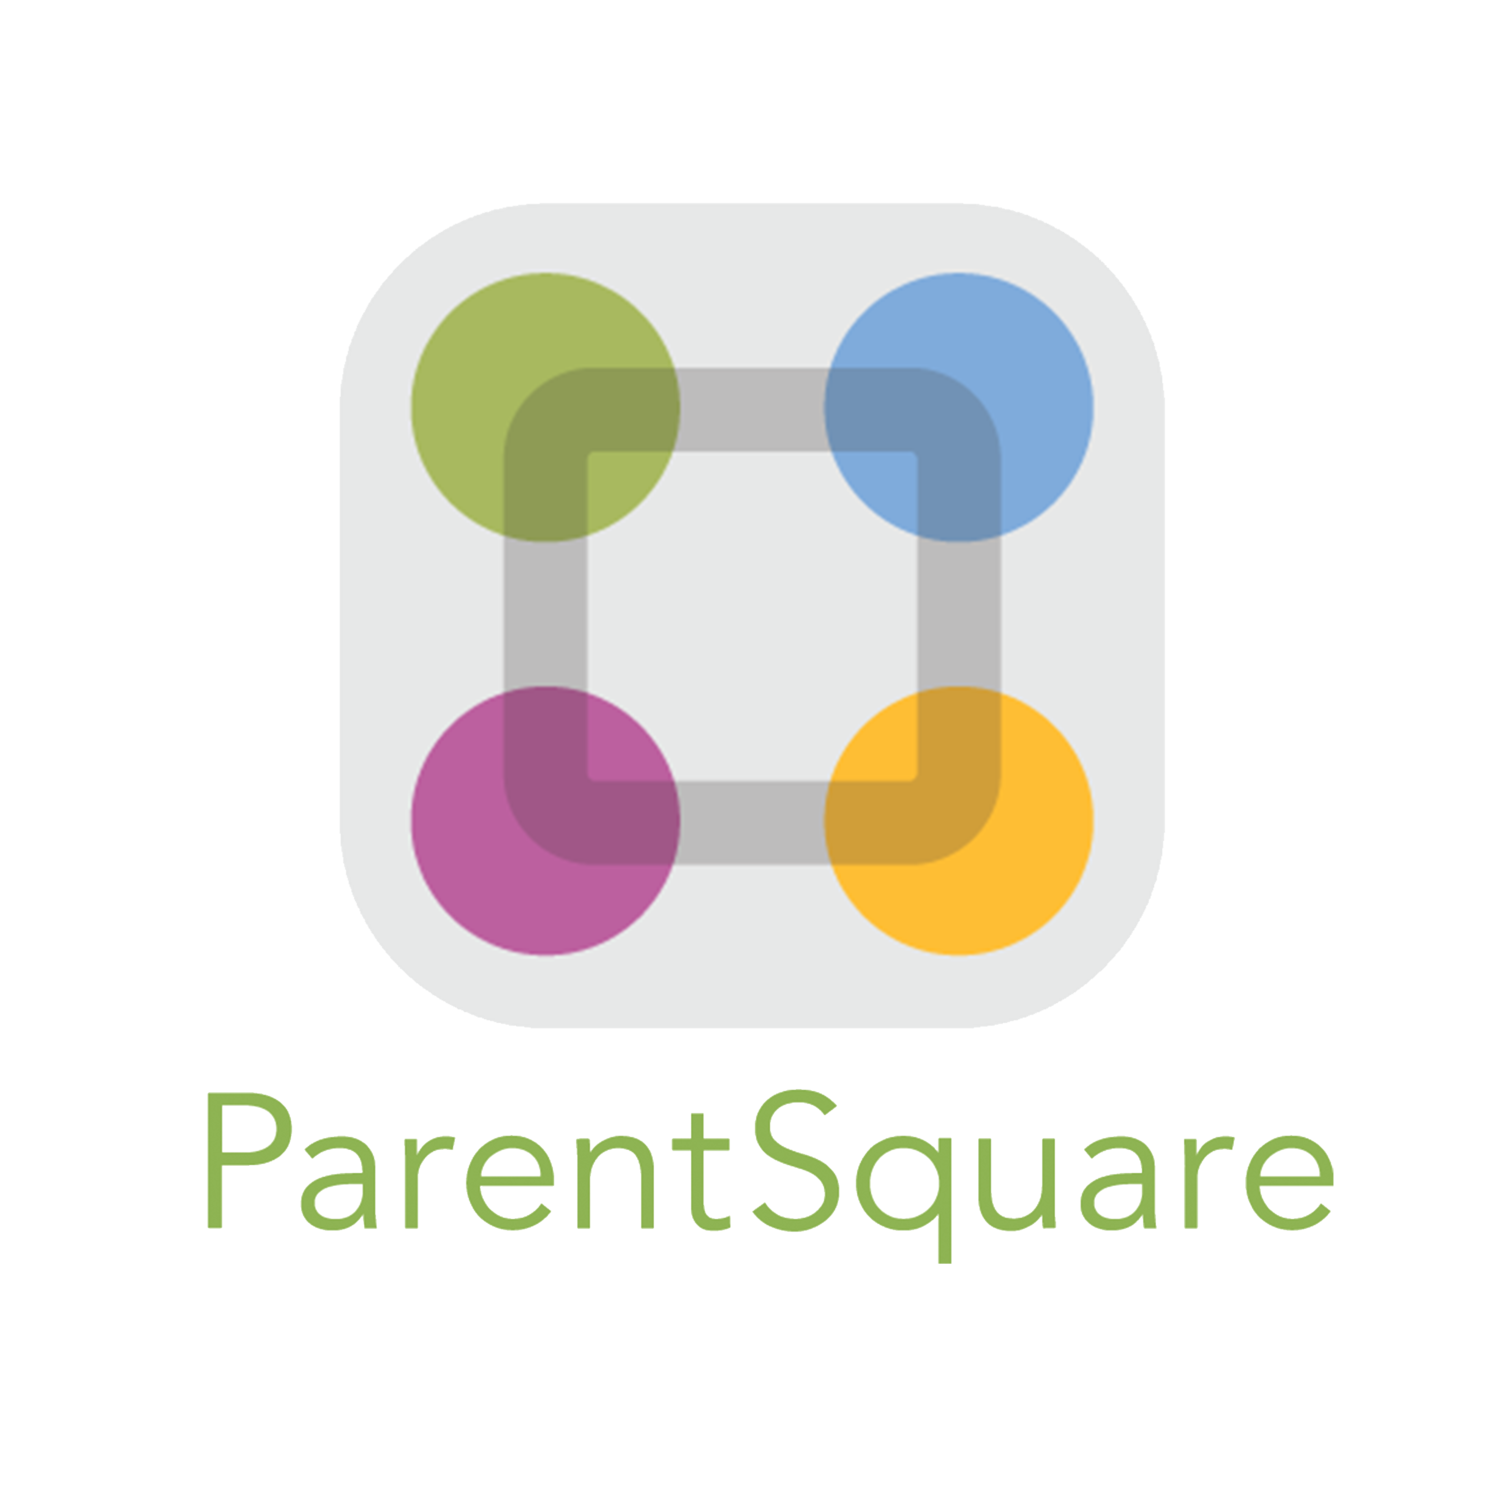 ParentSquare logo is the outline of a box with four small colored circles at each corner.